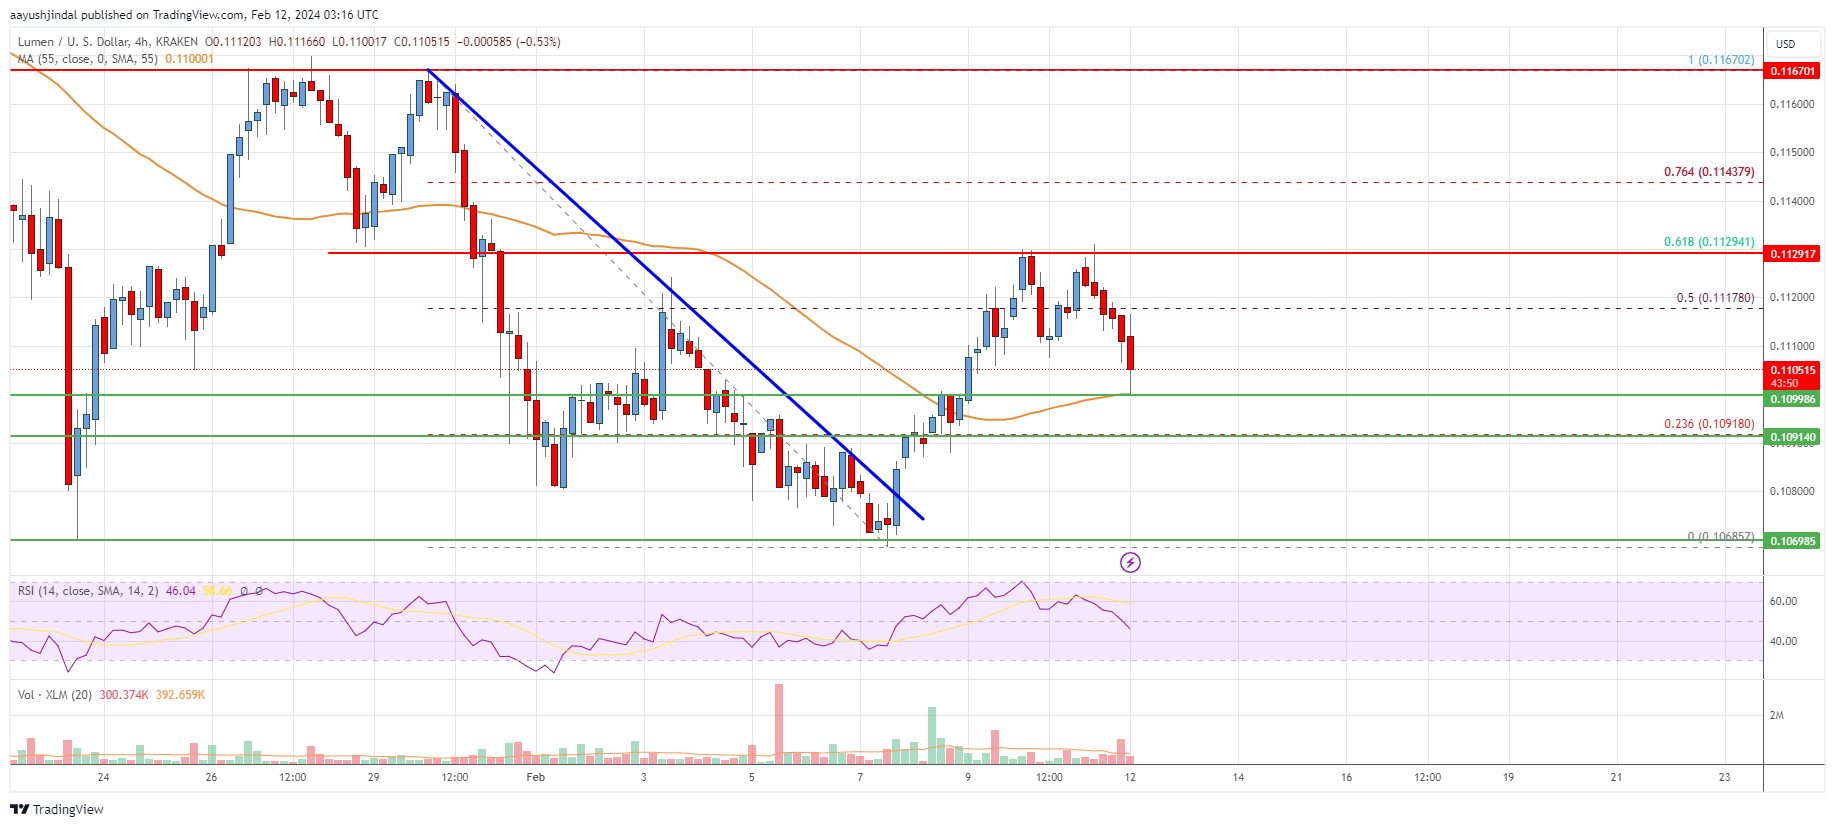 Stellar Lumen (XLM) Price Recovery Faces Uphill Task At $0.1130